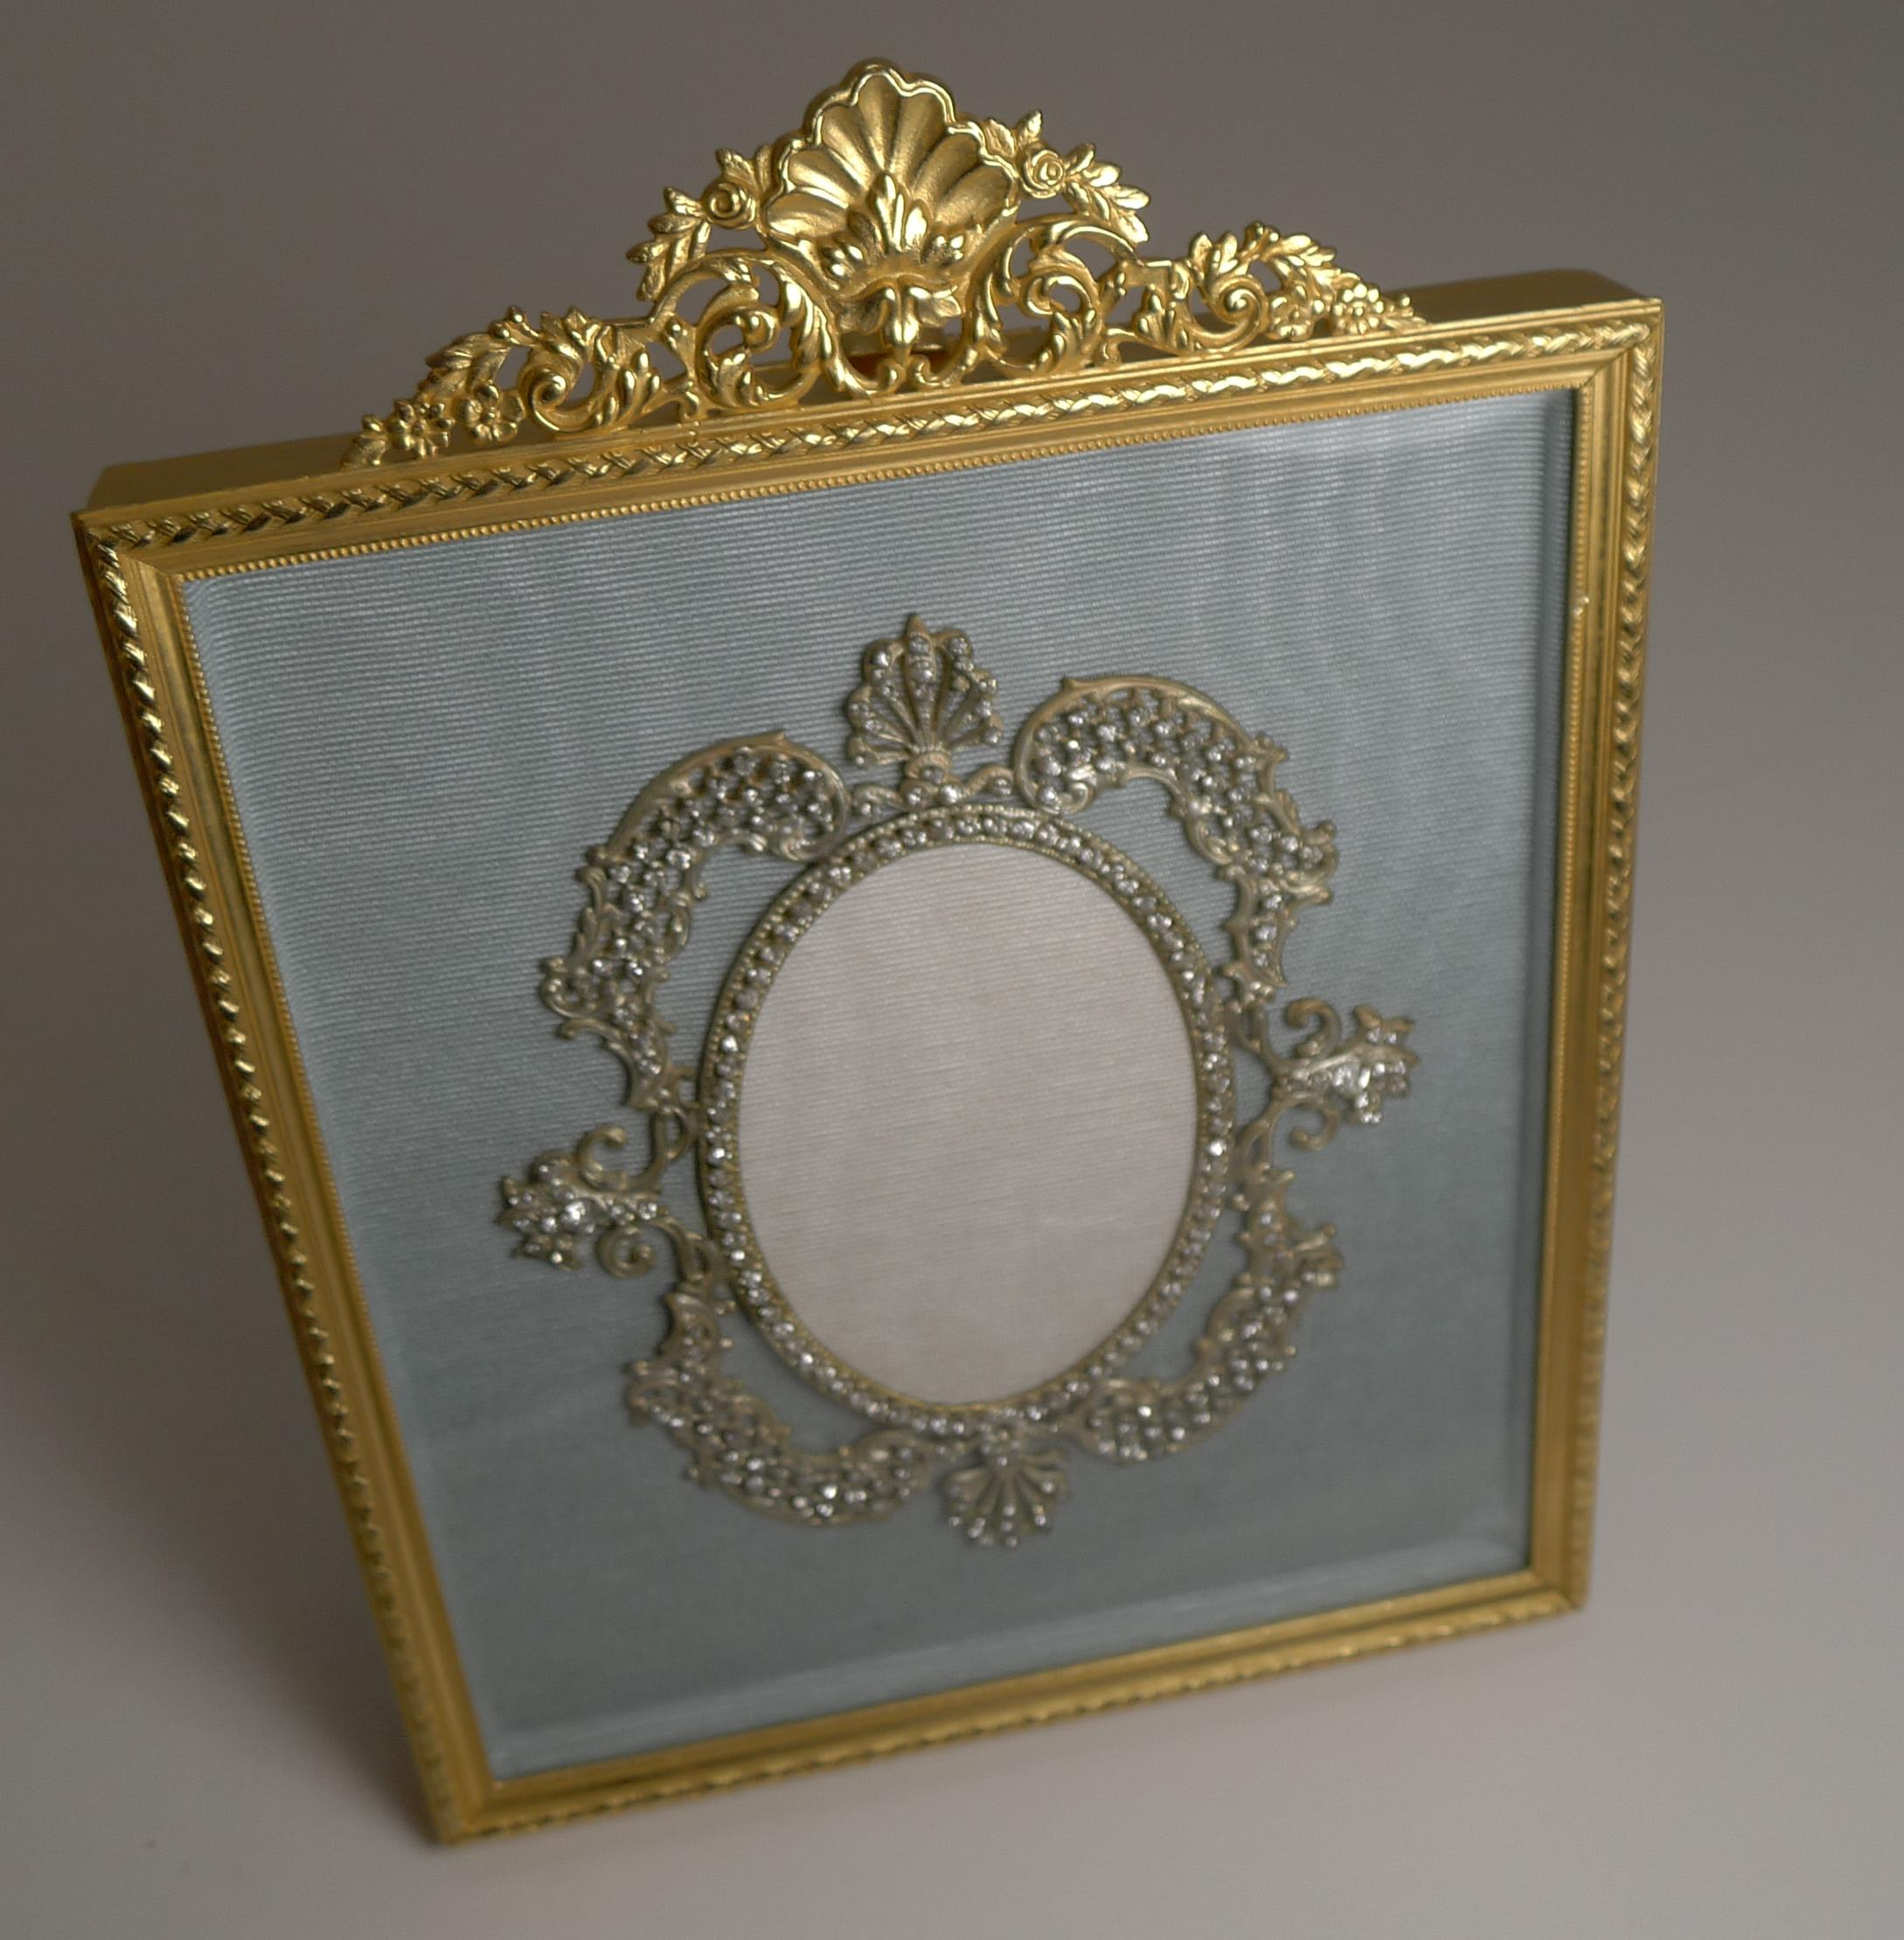 A most unusual late 19th-early 20th century French Ormolu picture frame made from bronze and lavishly decorated with gold, having been professionally restored to it's former glory.

The floating glass front protects the grey/blue silk taffeta and